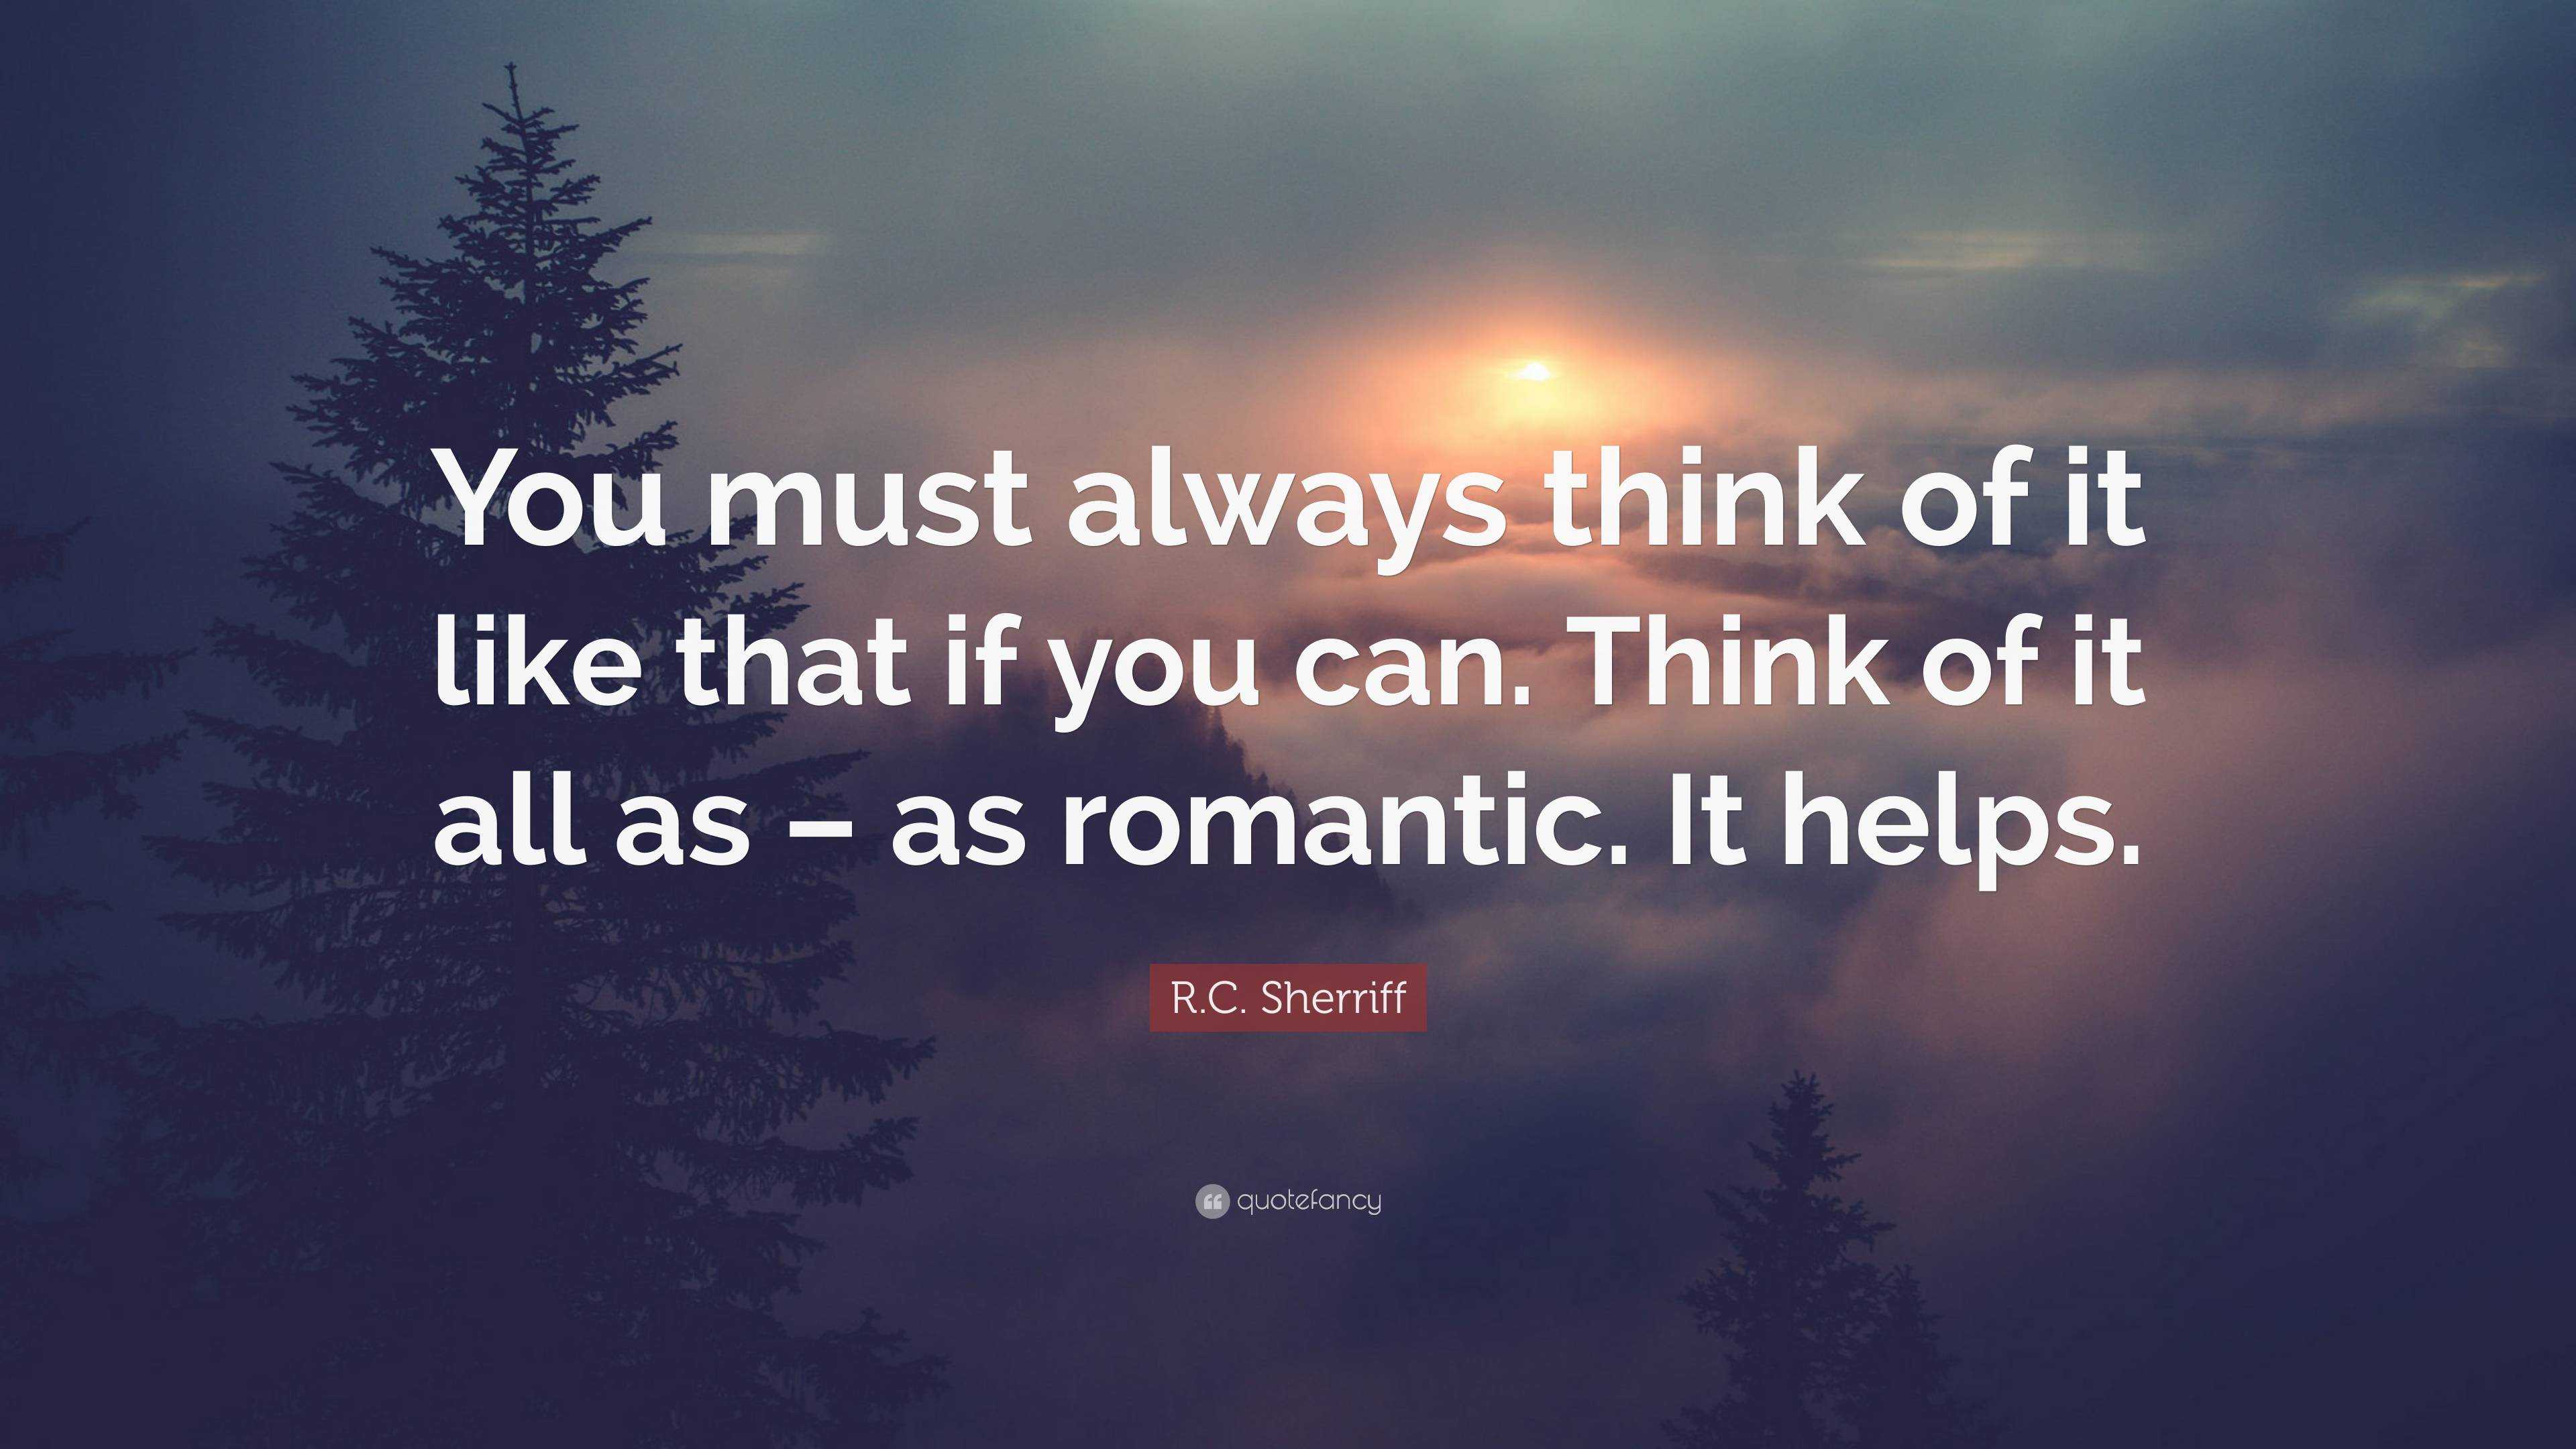 R.C. Sherriff Quote: “You must always think of it like that if you can ...